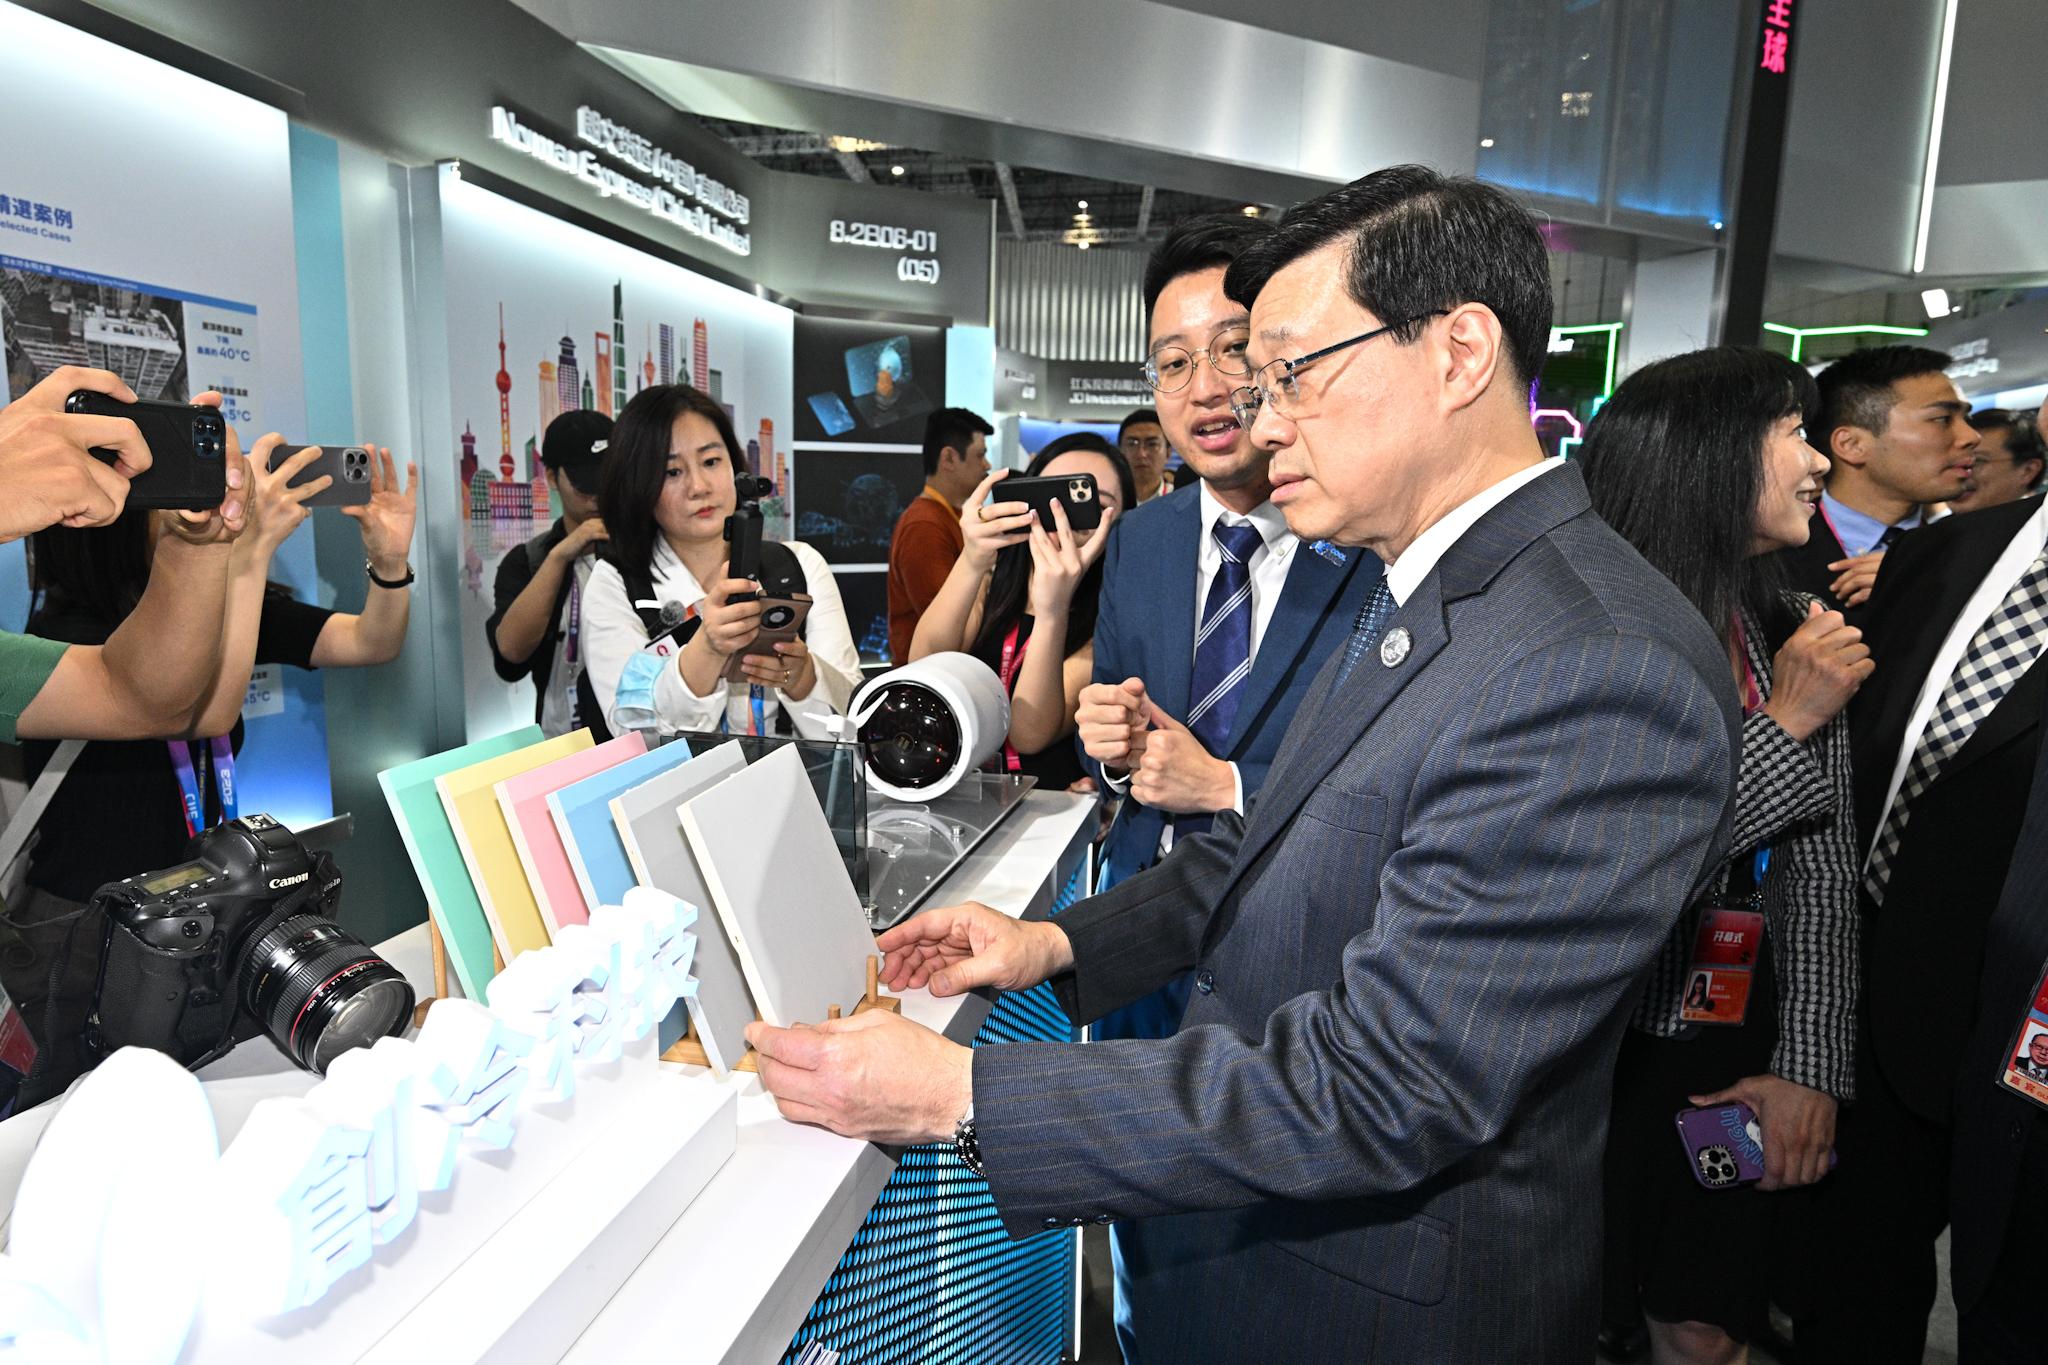 The Chief Executive, Mr John Lee, visited the Hong Kong Exhibition Area of the sixth China International Import Expo in Shanghai today (November 5). Photo shows Mr Lee (third right) interacting with exhibitors.